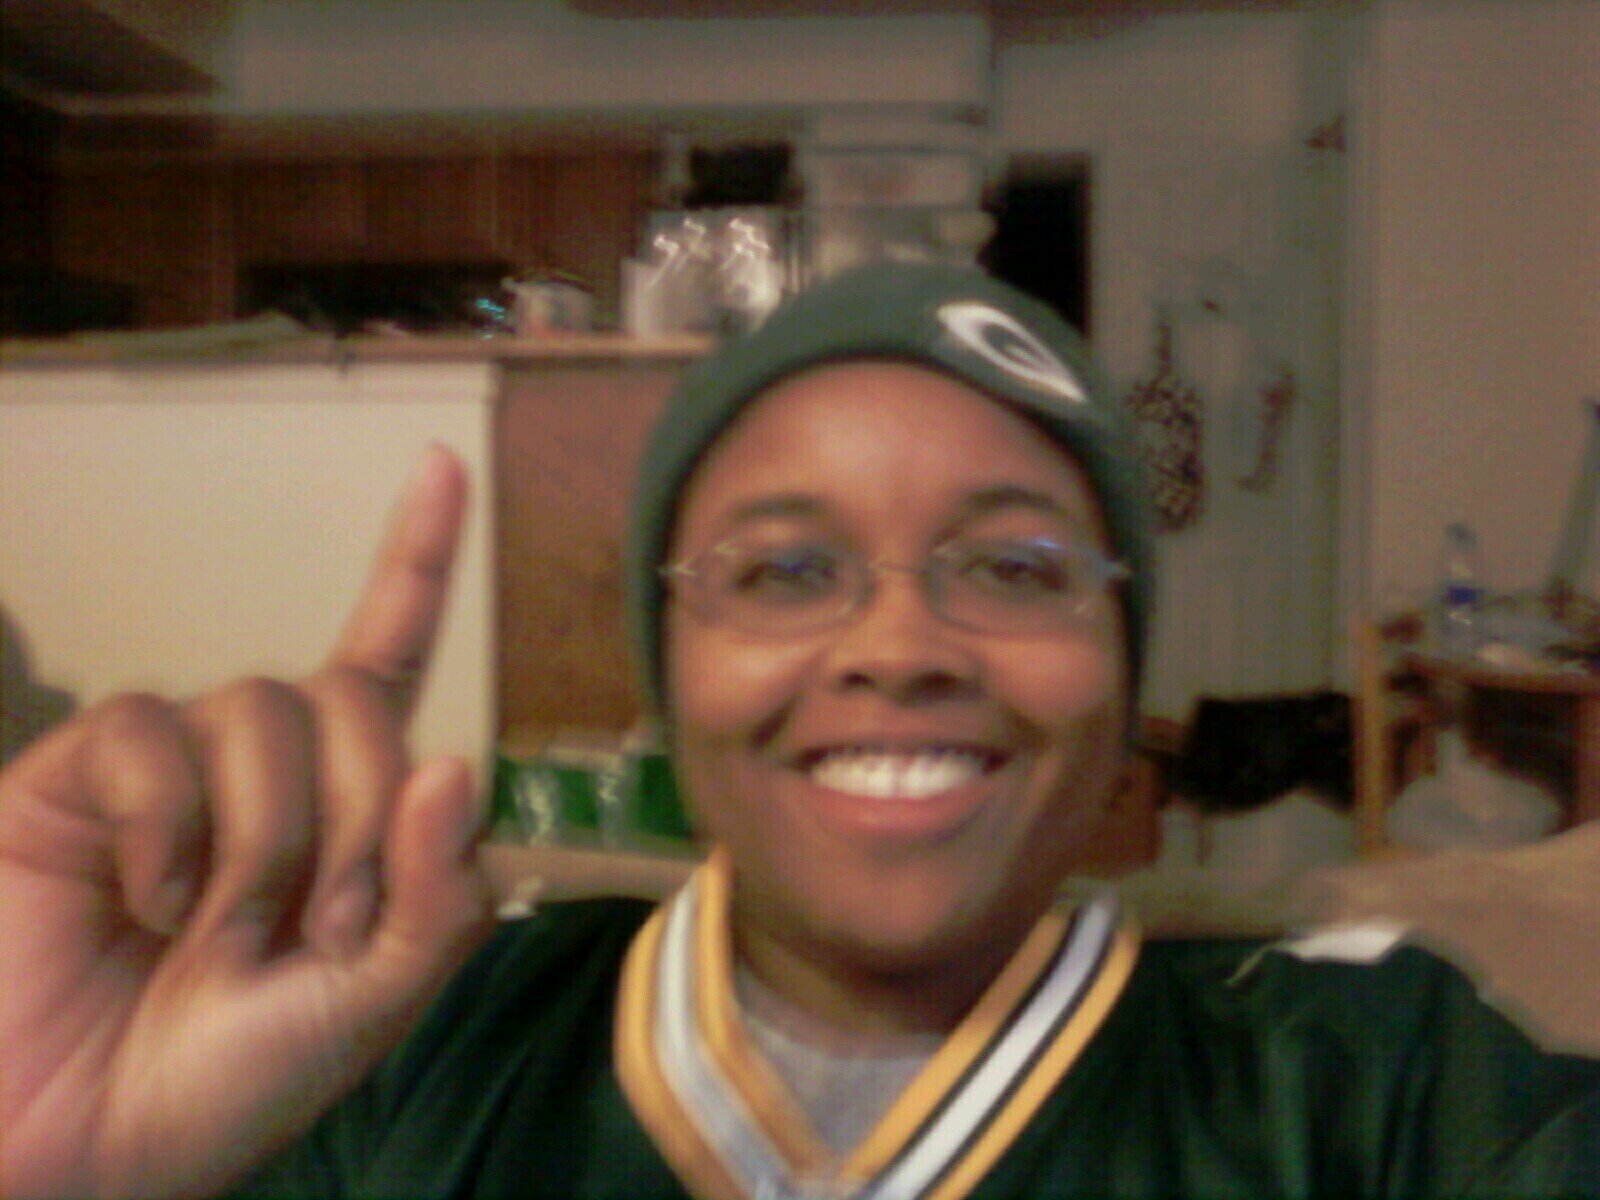 Some folk believe that shit don't stink...I do🤷🏿‍♀️ PACKERS FAN 4 LIFE!! GO PACK GO! KING OF THE NORTH💚💛🏈LAKE SHOW ALL DAY💜💛